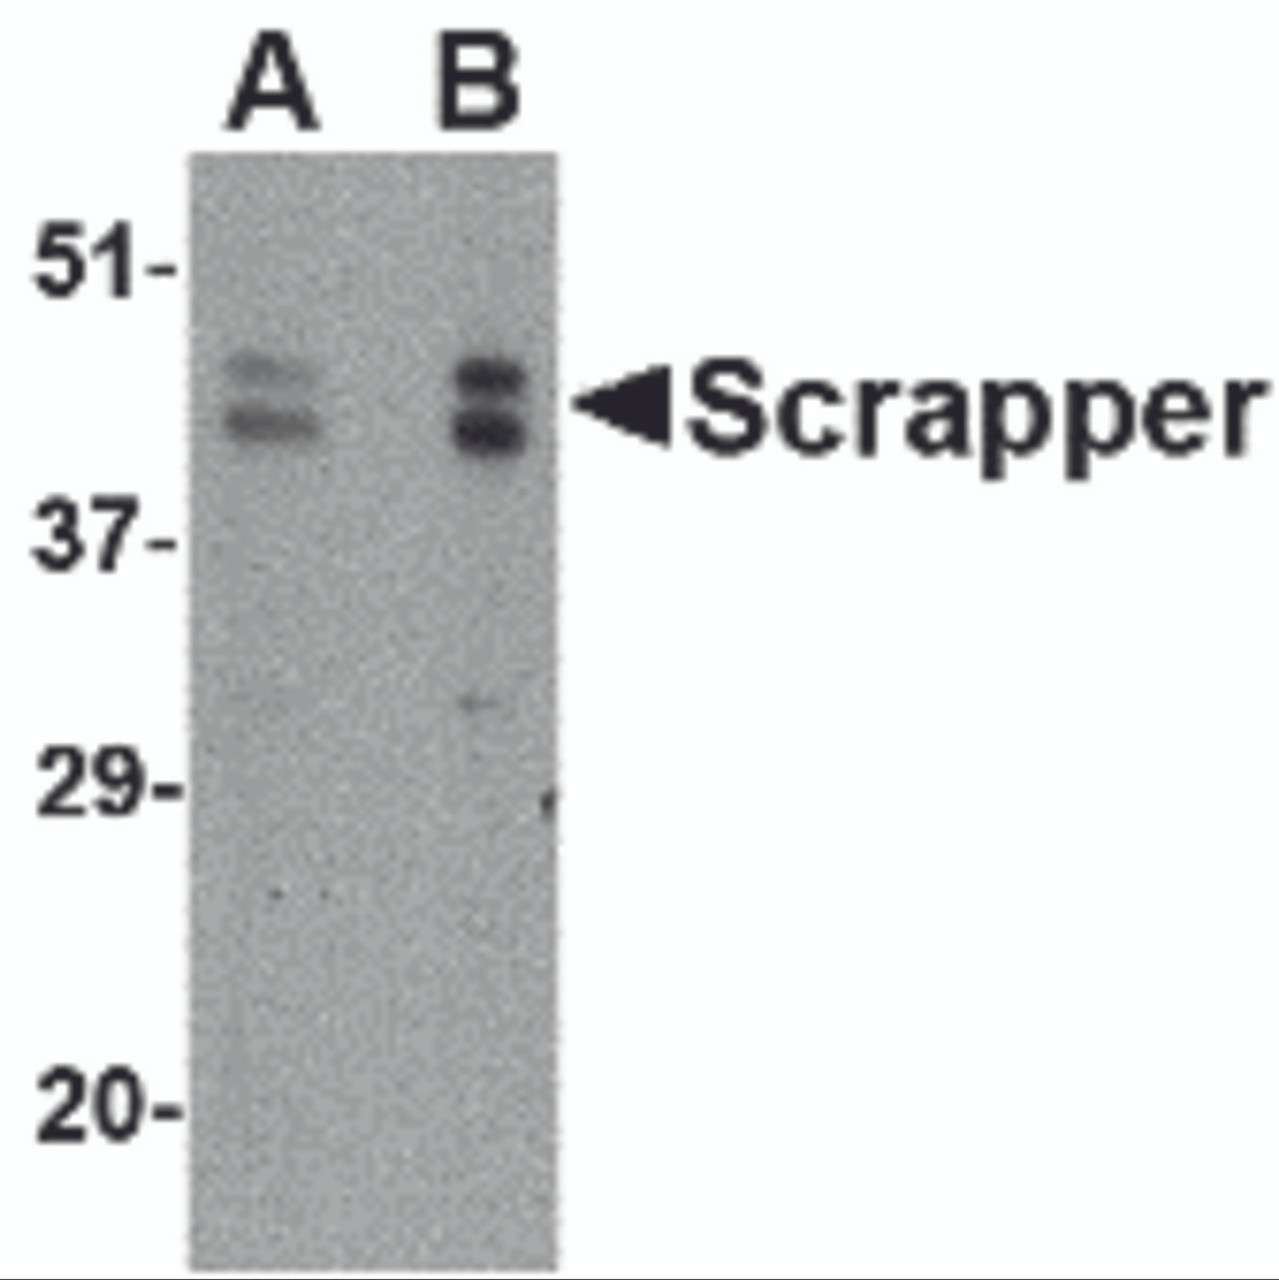 Western blot analysis of SCRAPPER in A20 cell lysate with SCRAPPER antibody at (A) 0.5 and (B) 1 &#956;g/mL.